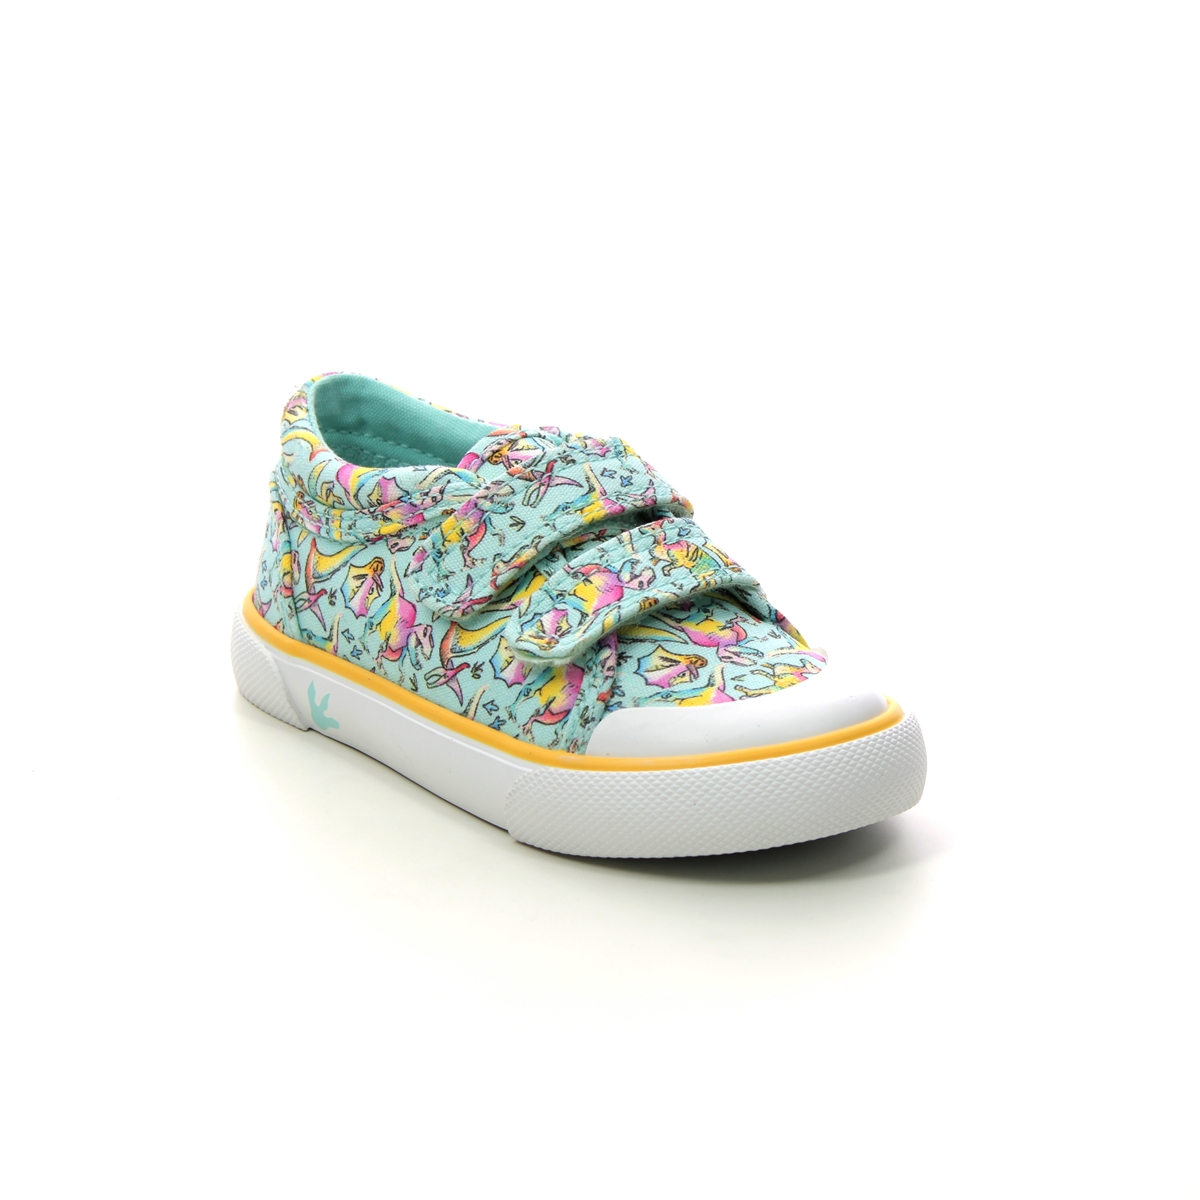 Start Rite Dino Mite Canvas Blue multi Kids toddler girls trainers 6192-56F in a Plain Canvas in Size 6